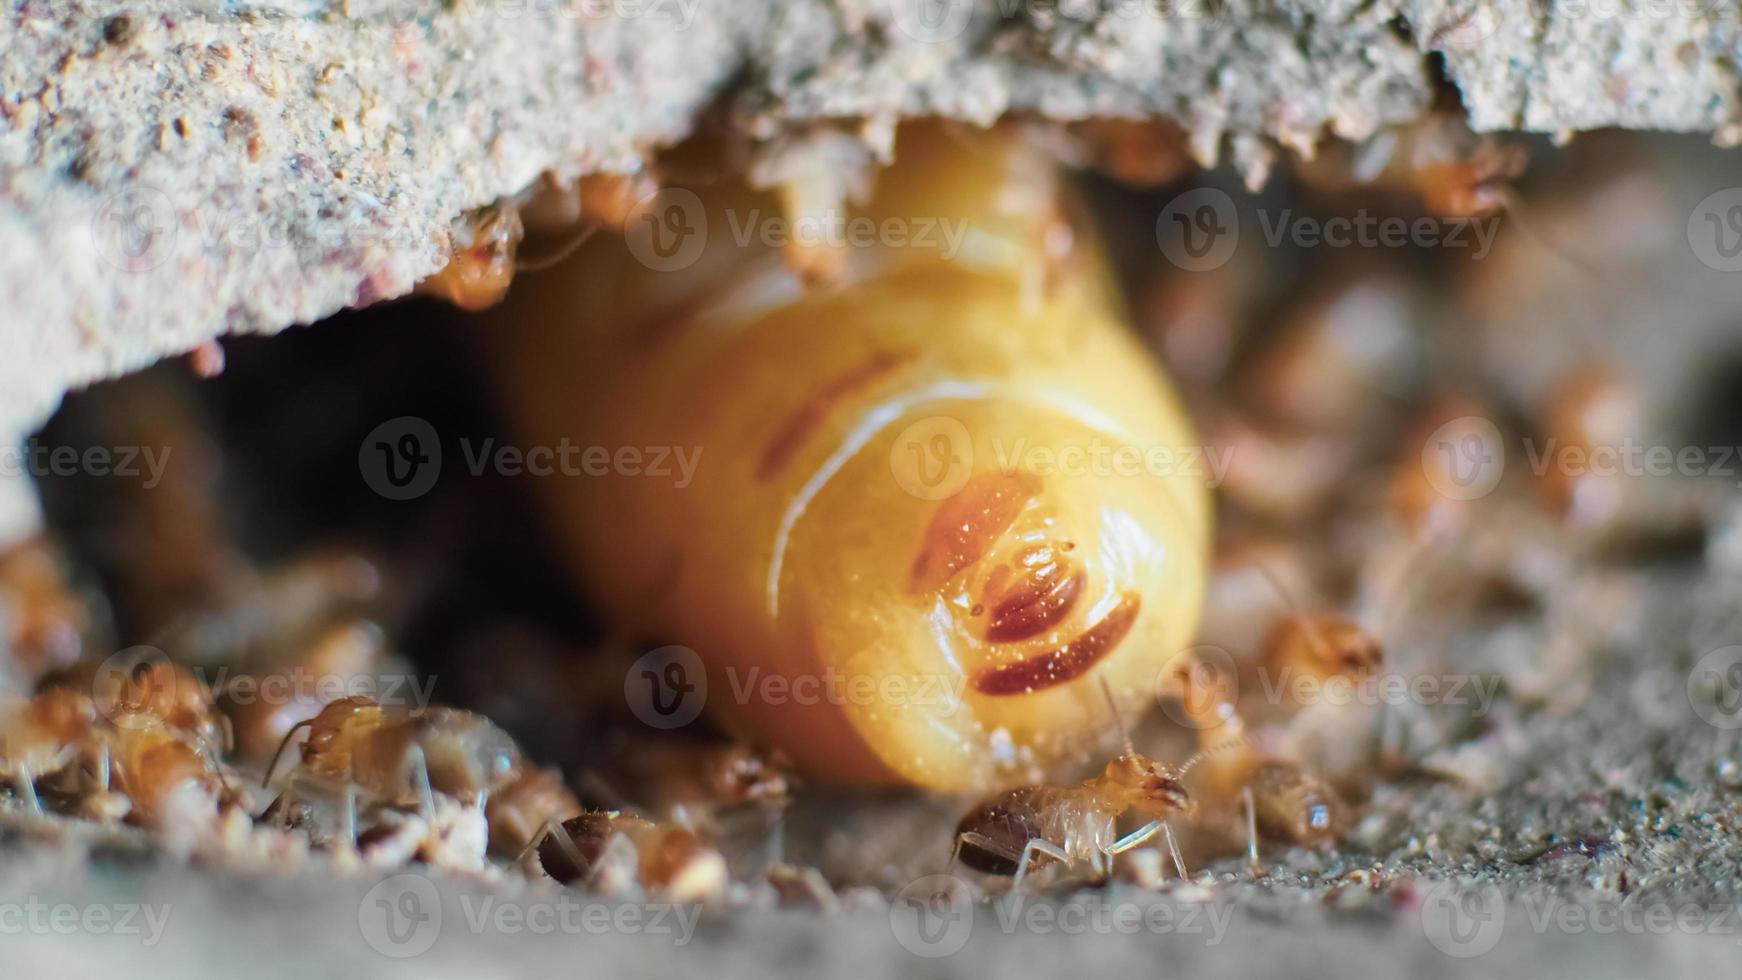 Macro shot. Queen of termites and termites working in a nest made of soil. small animal world concept photo